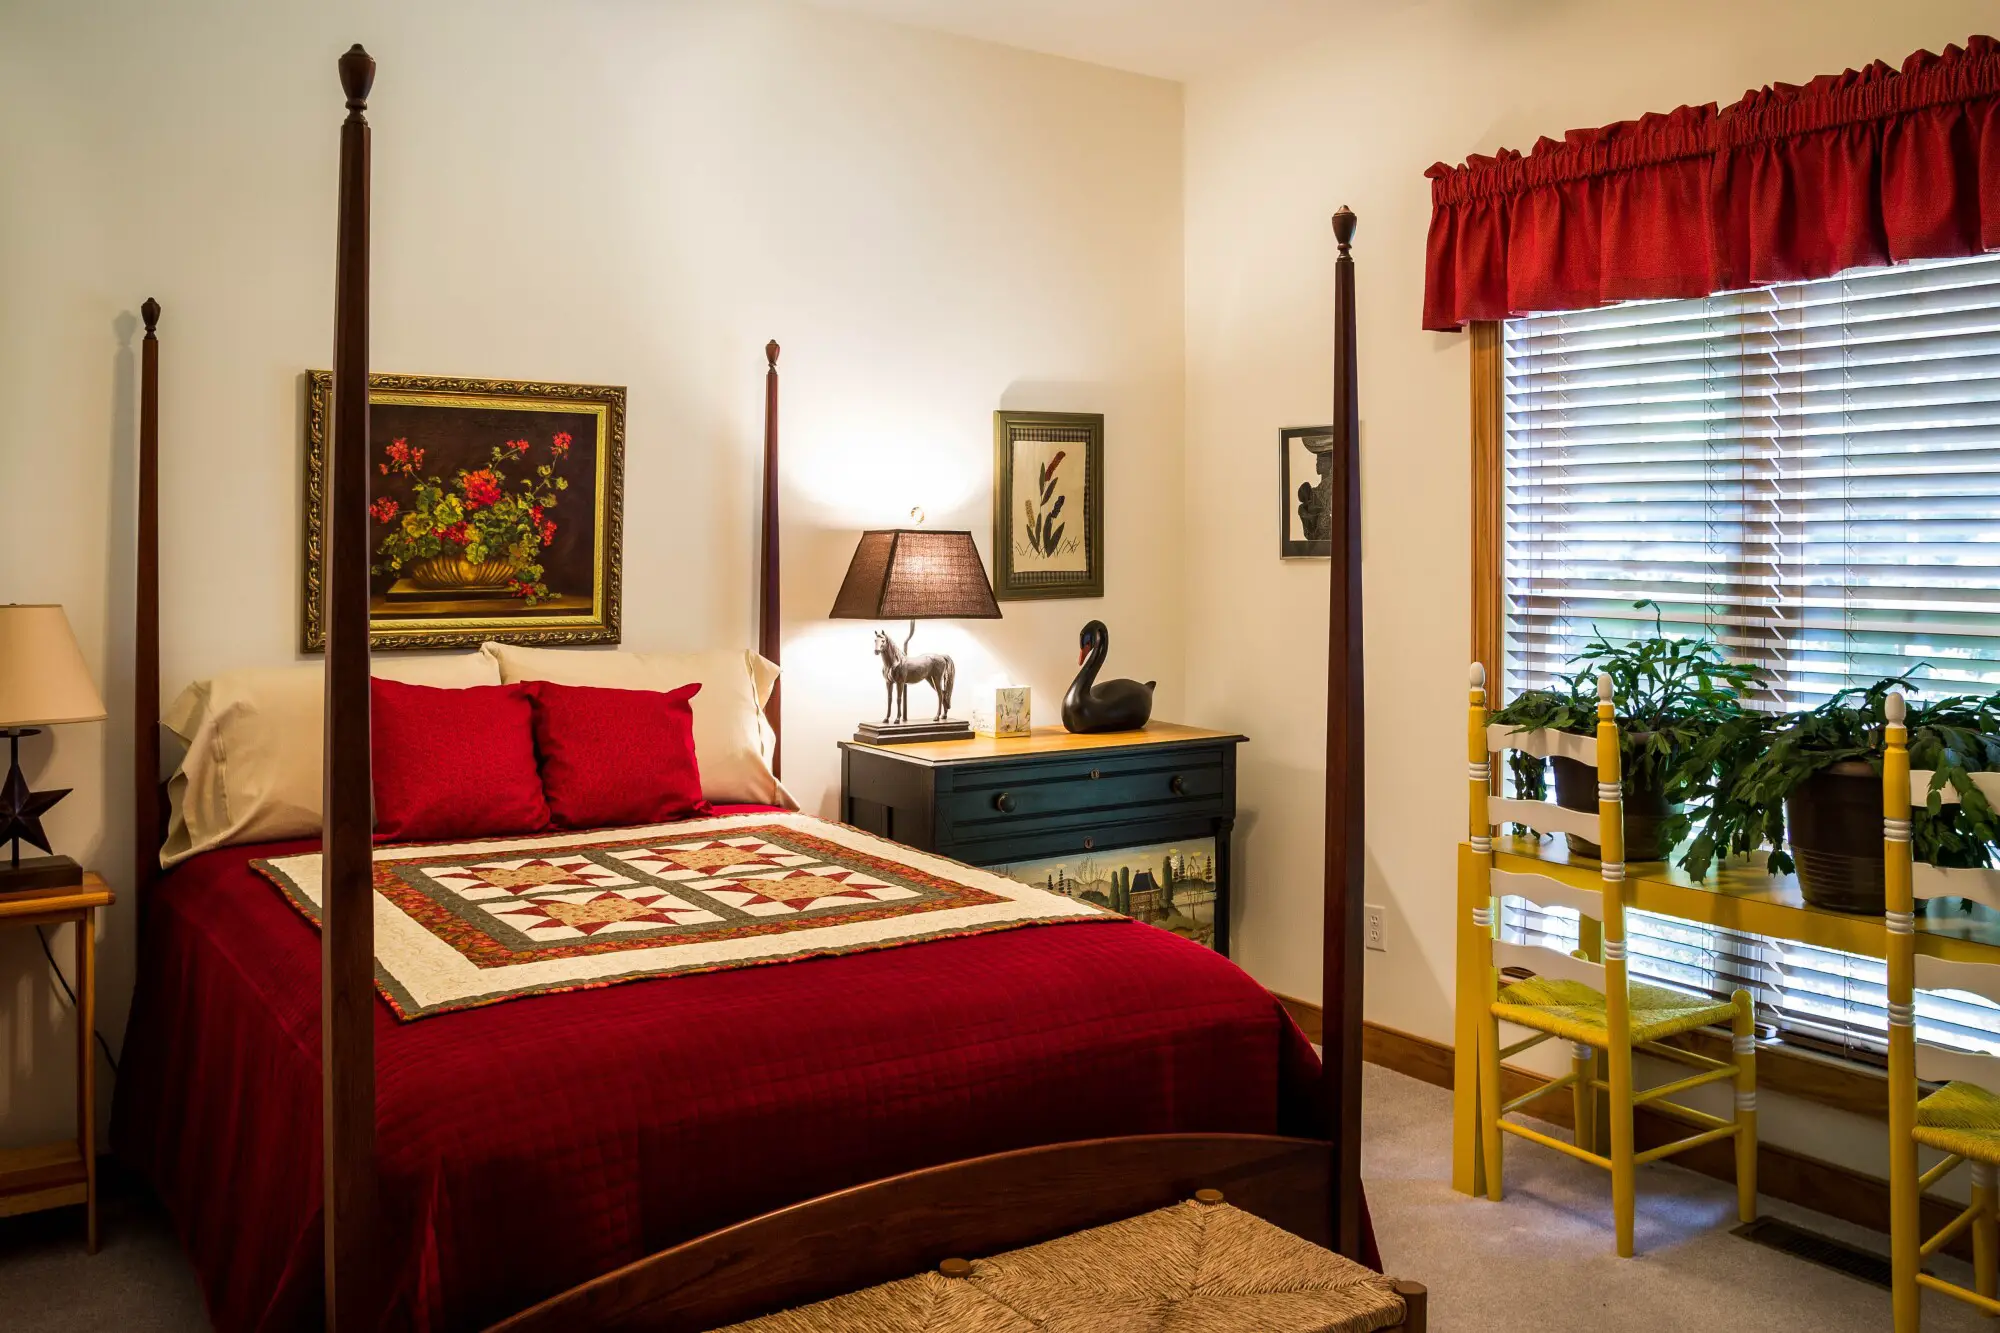 Guest Suite Guide: What Is A Guest Suite?